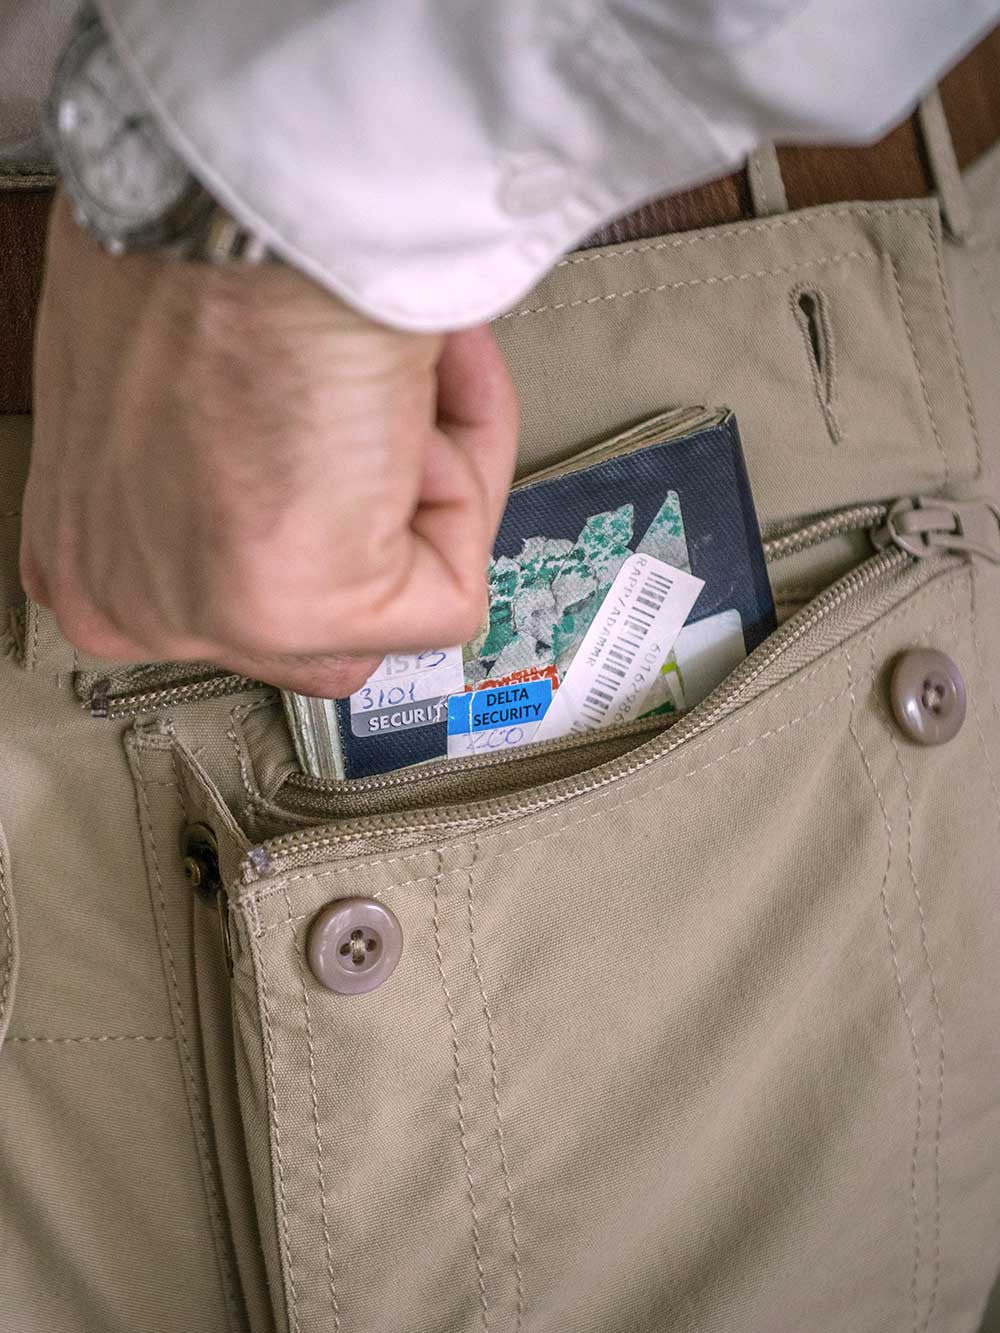 Hack-Proof Pants Protect Your Credit Cards from Digital Pickpockets -  TheStreet